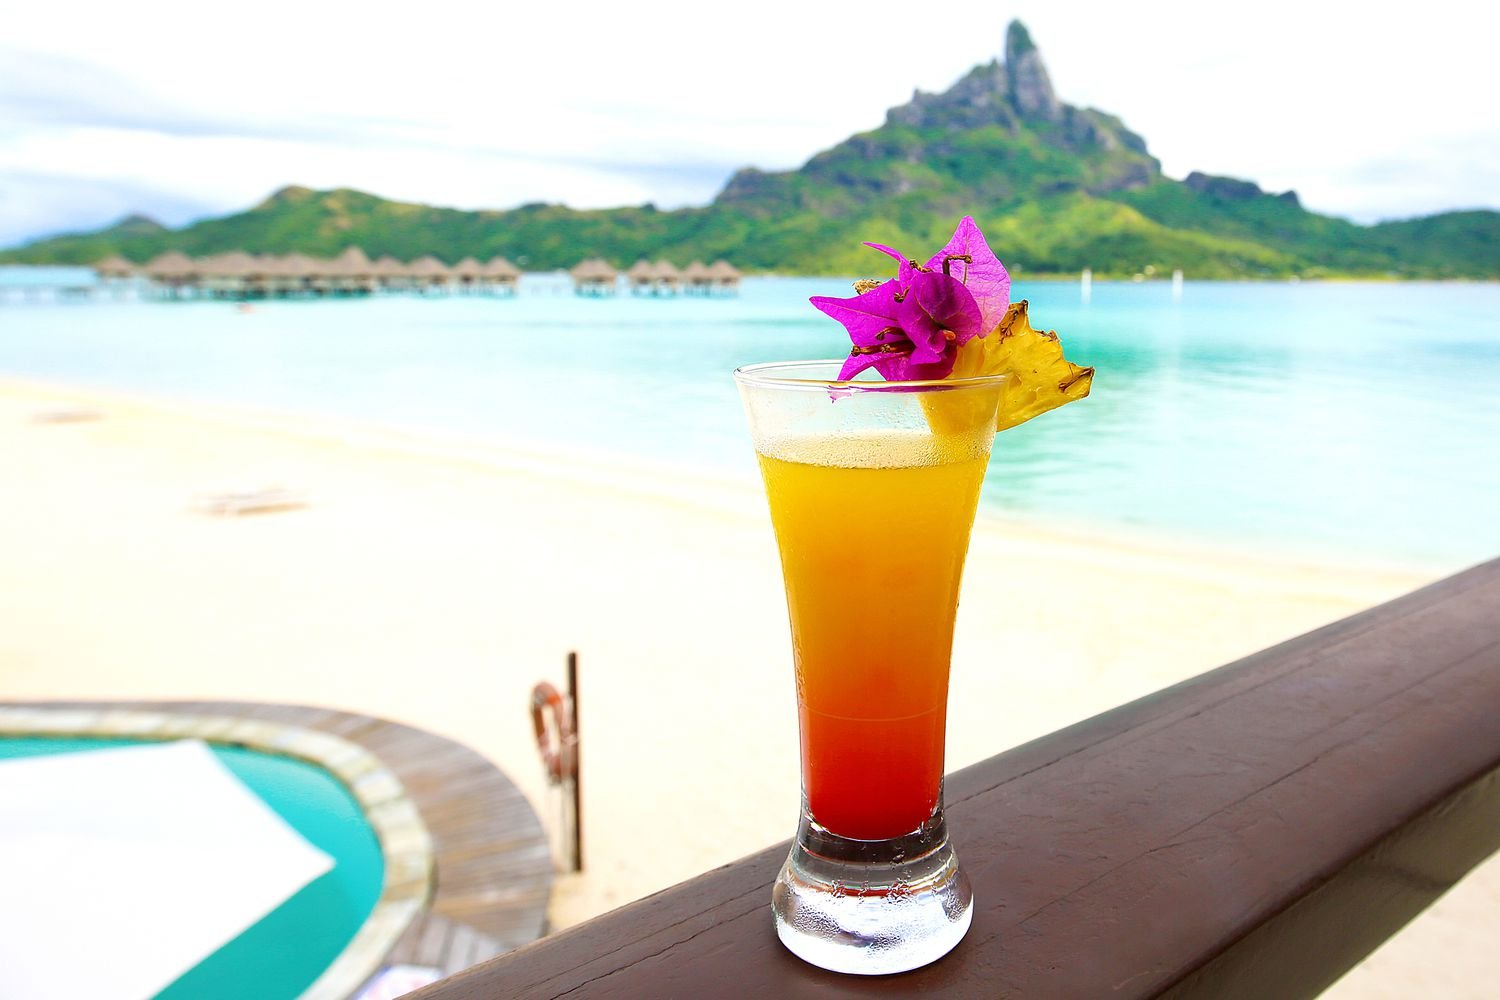 When Tourism Came to a Halt, a Craft Beer and Spirits Boom Emerged in Tahiti